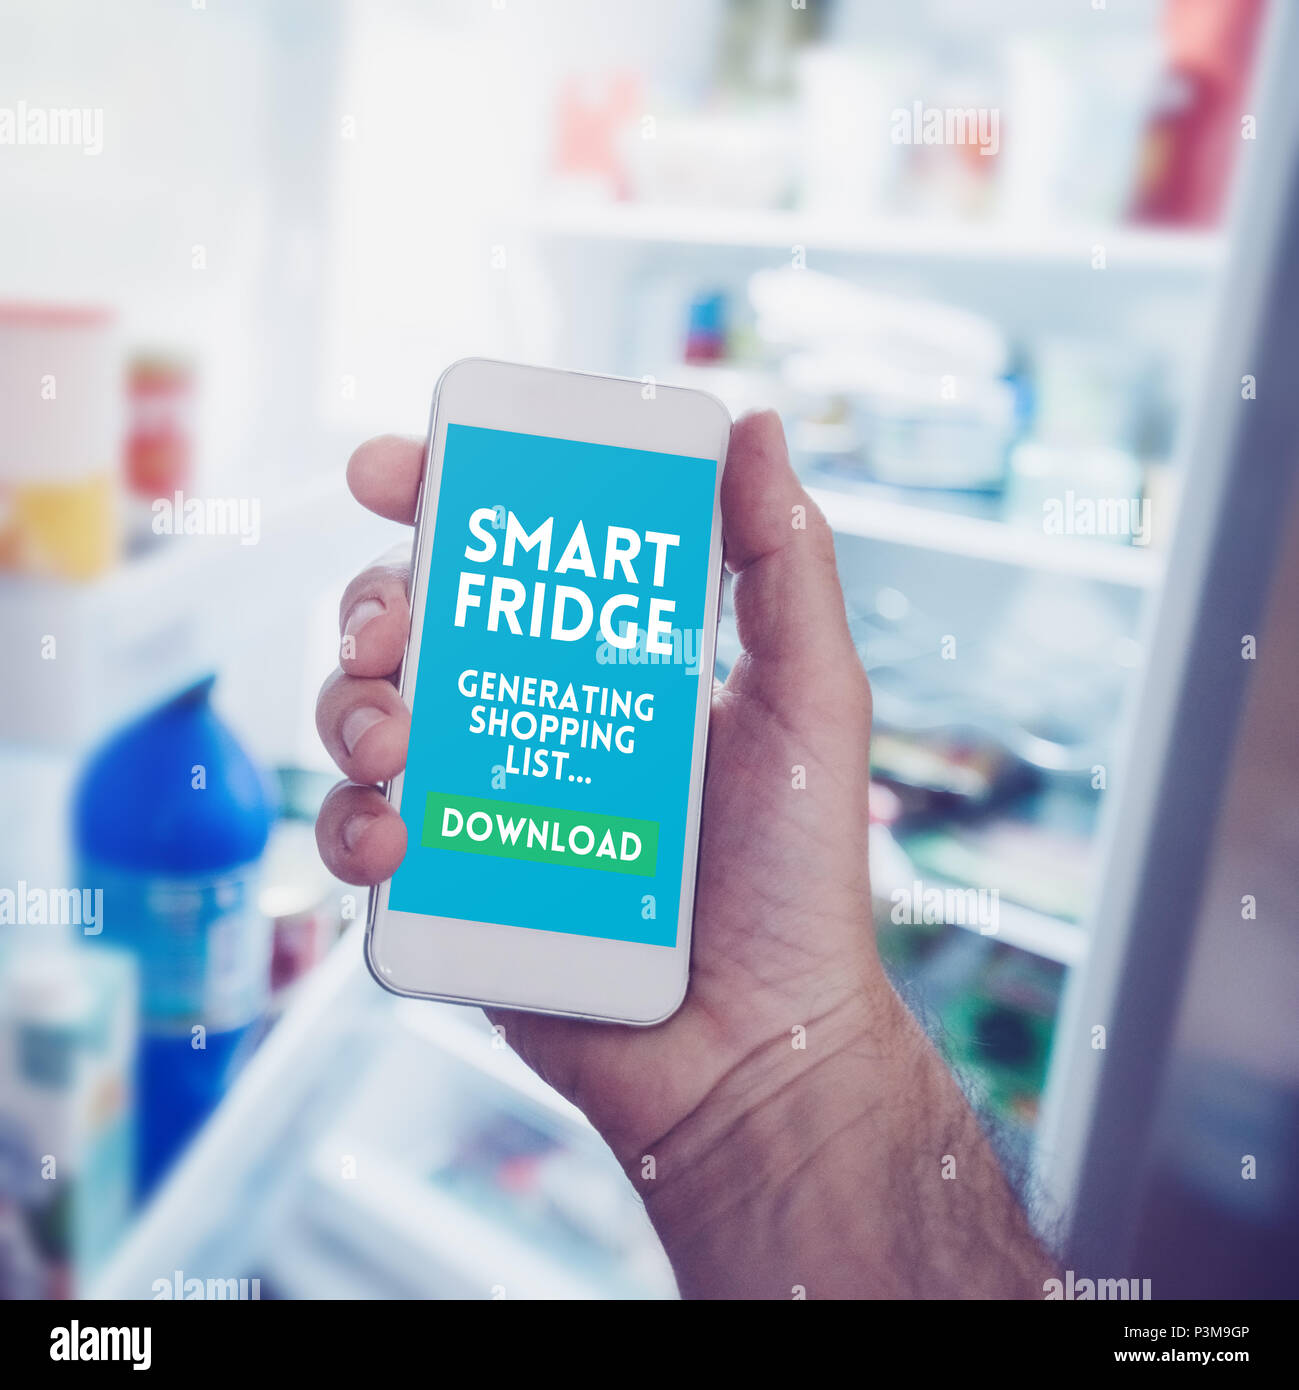 Internet of things, smartphone connecting with refrigerator to generate smart shopping list. Home kitchen appliance connecting with mobile phone and e Stock Photo